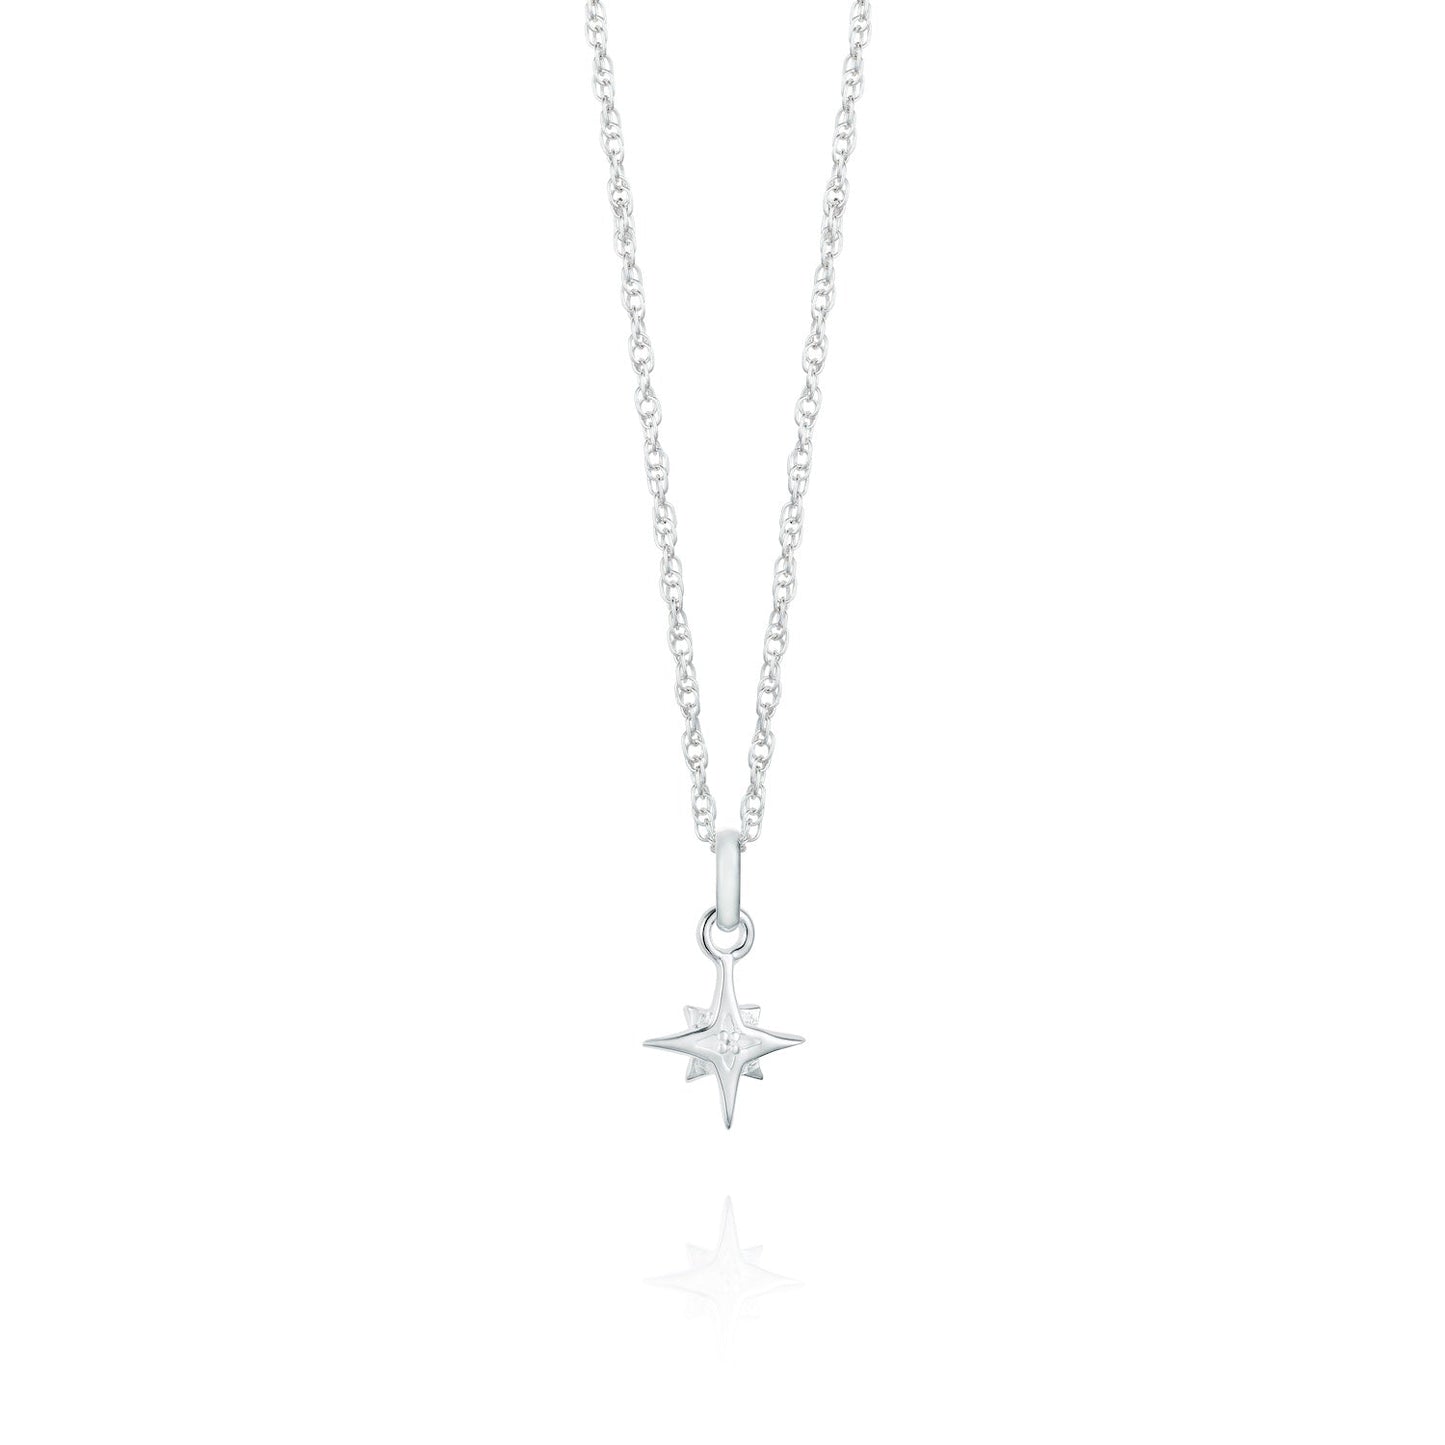 Compass Star Necklace by Yasmin Everley